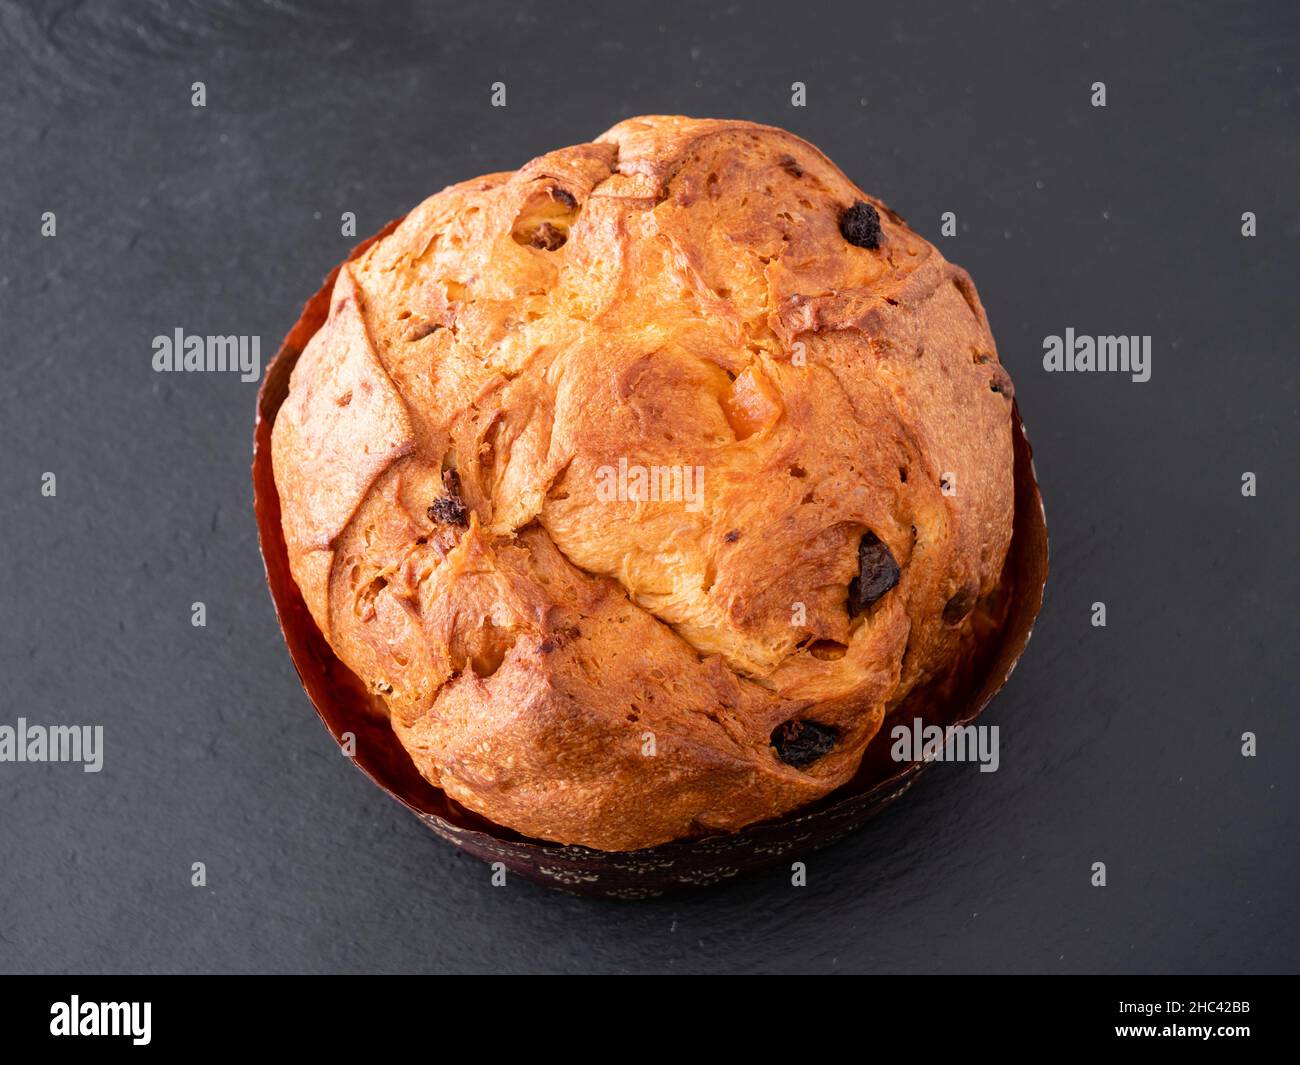 Whole Panettone Italian Sponge Cake or Sweet Bread from Milan, Served Traditionally for Christmas Stock Photo